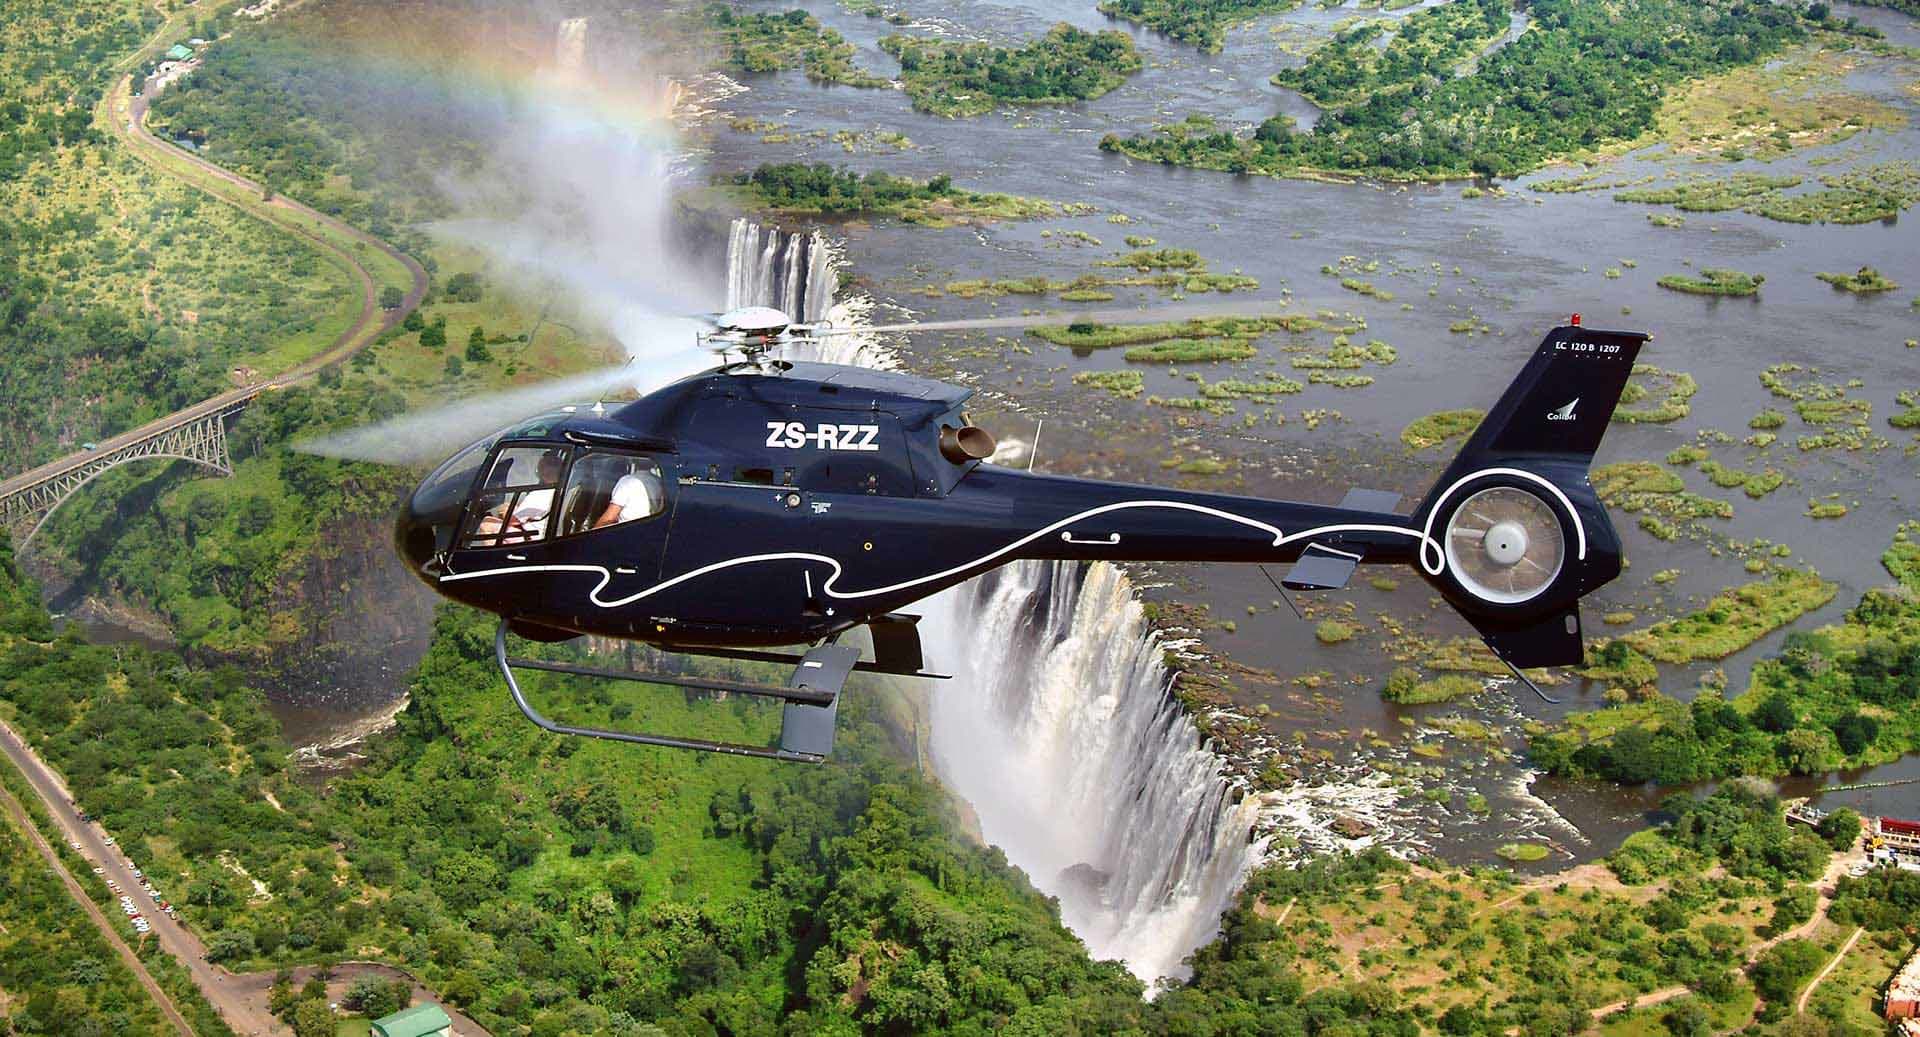 Private helicopter ride from the Livingstone Hotel in Zambia with view of Victoria Falls.